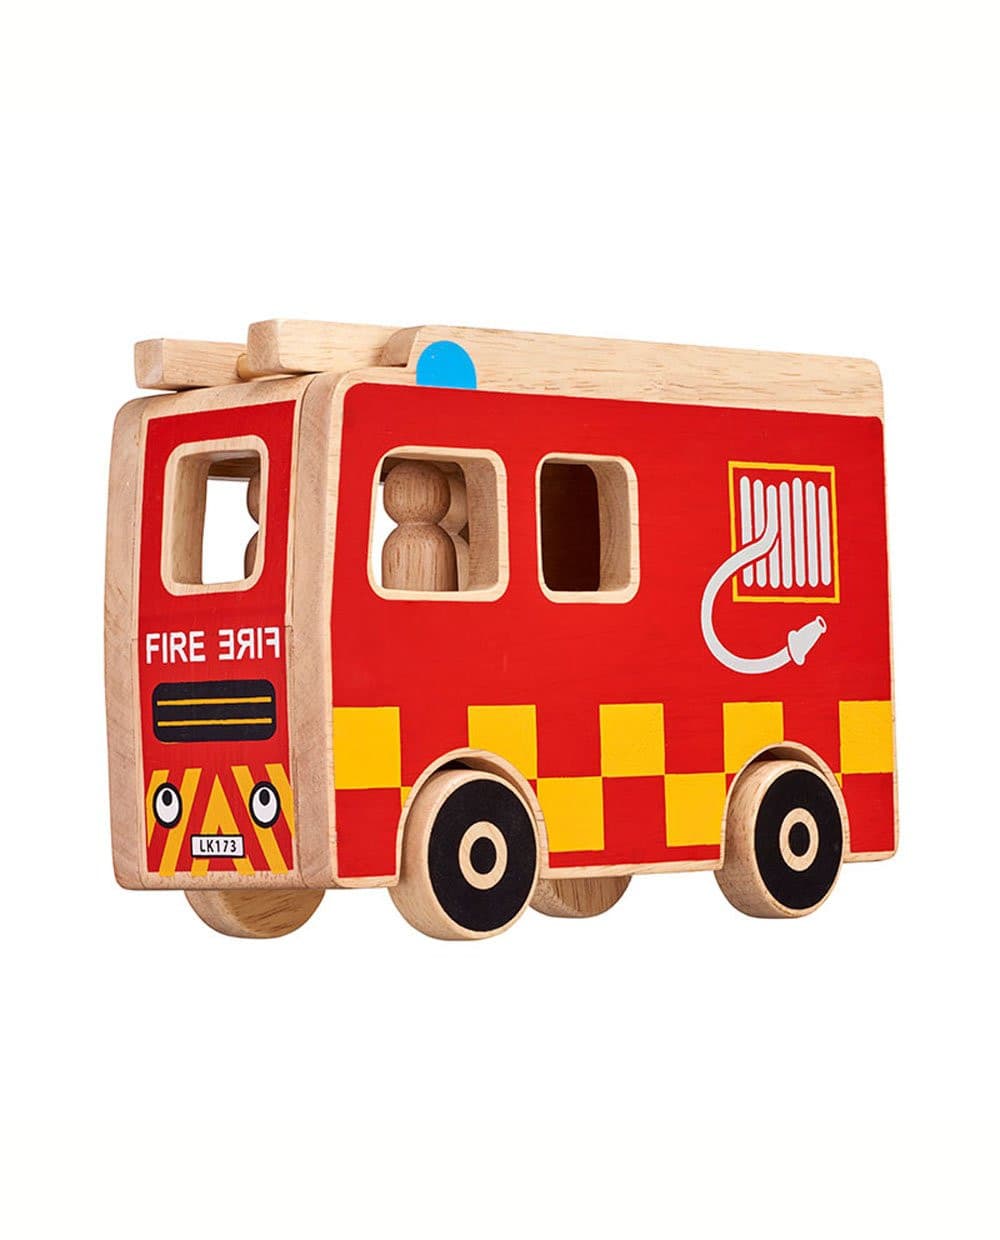 Lanka Kade Wooden Fire Engine with 3 people